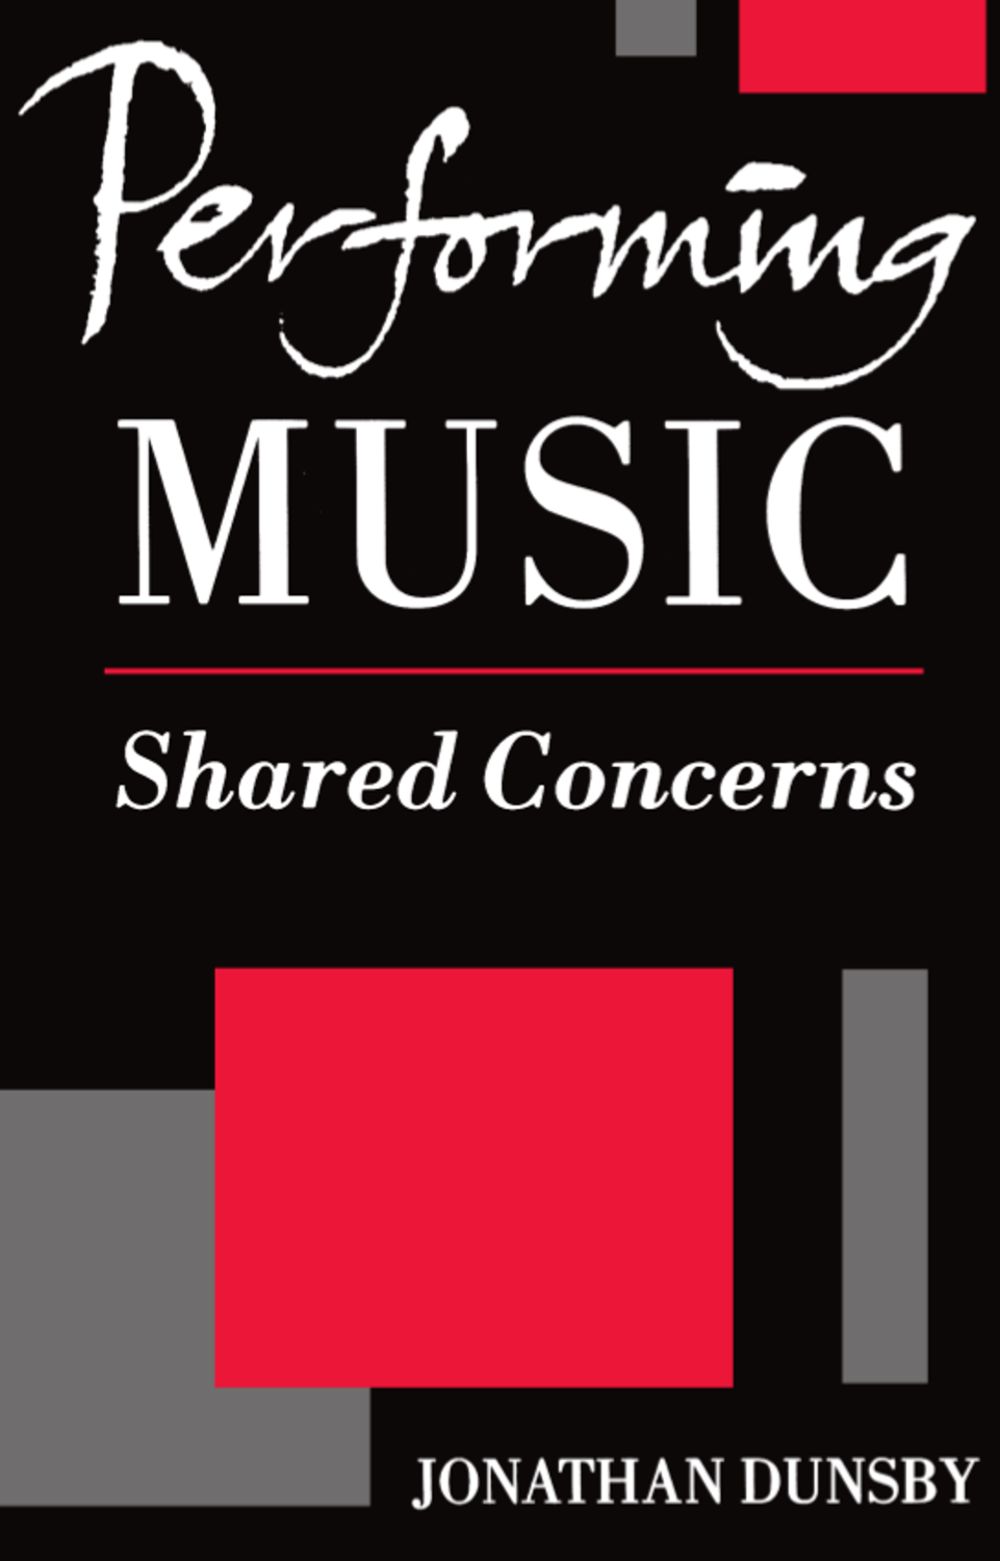 Dunsby Performing Music Shared Concerns Paperback Sheet Music Songbook